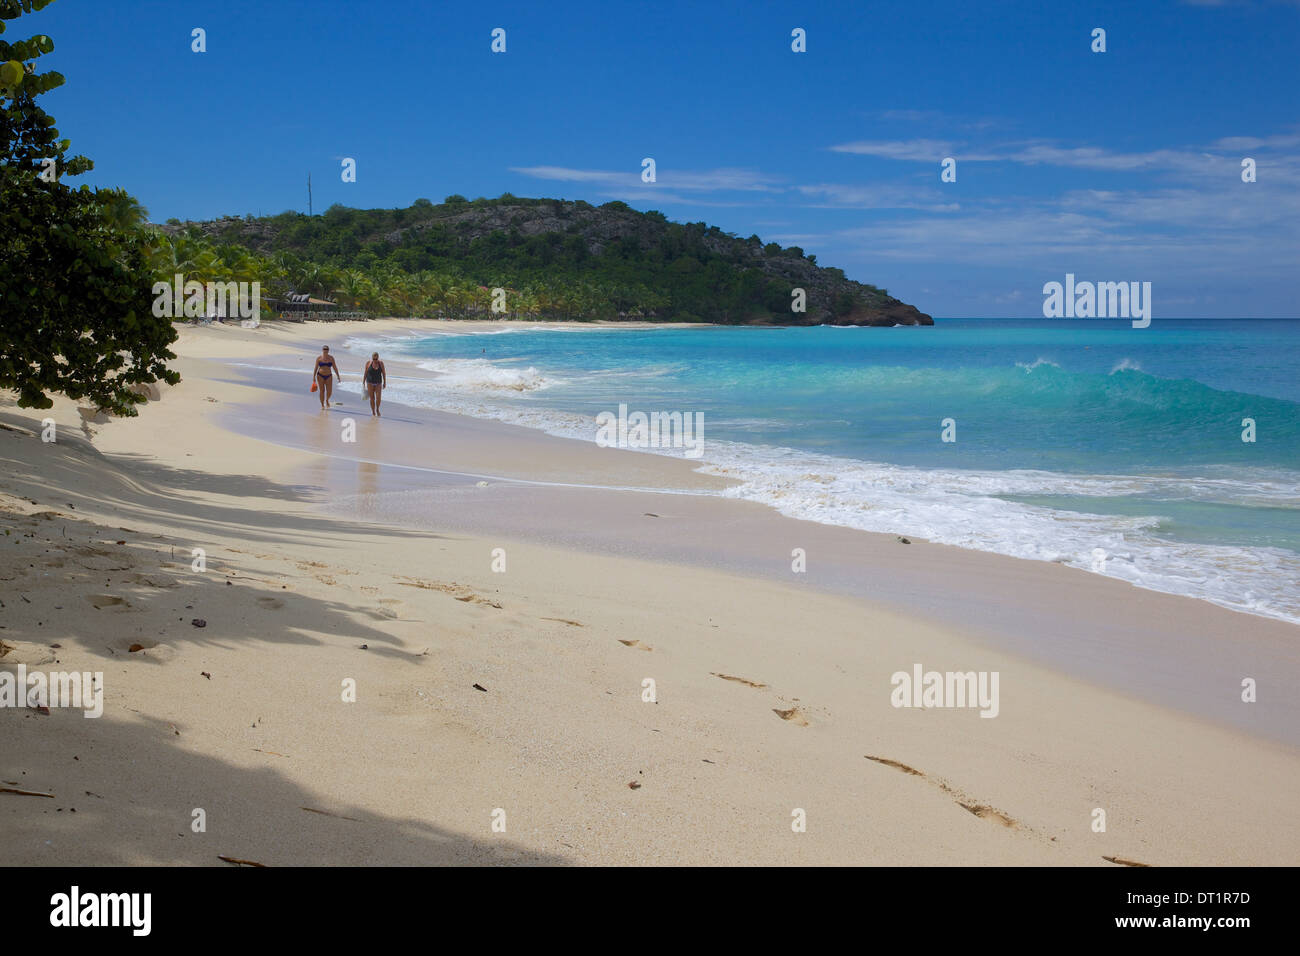 Galley Bay and Beach, St. Johns, Antigua, Leeward Islands, West Indies, Caribbean, Central America Stock Photo